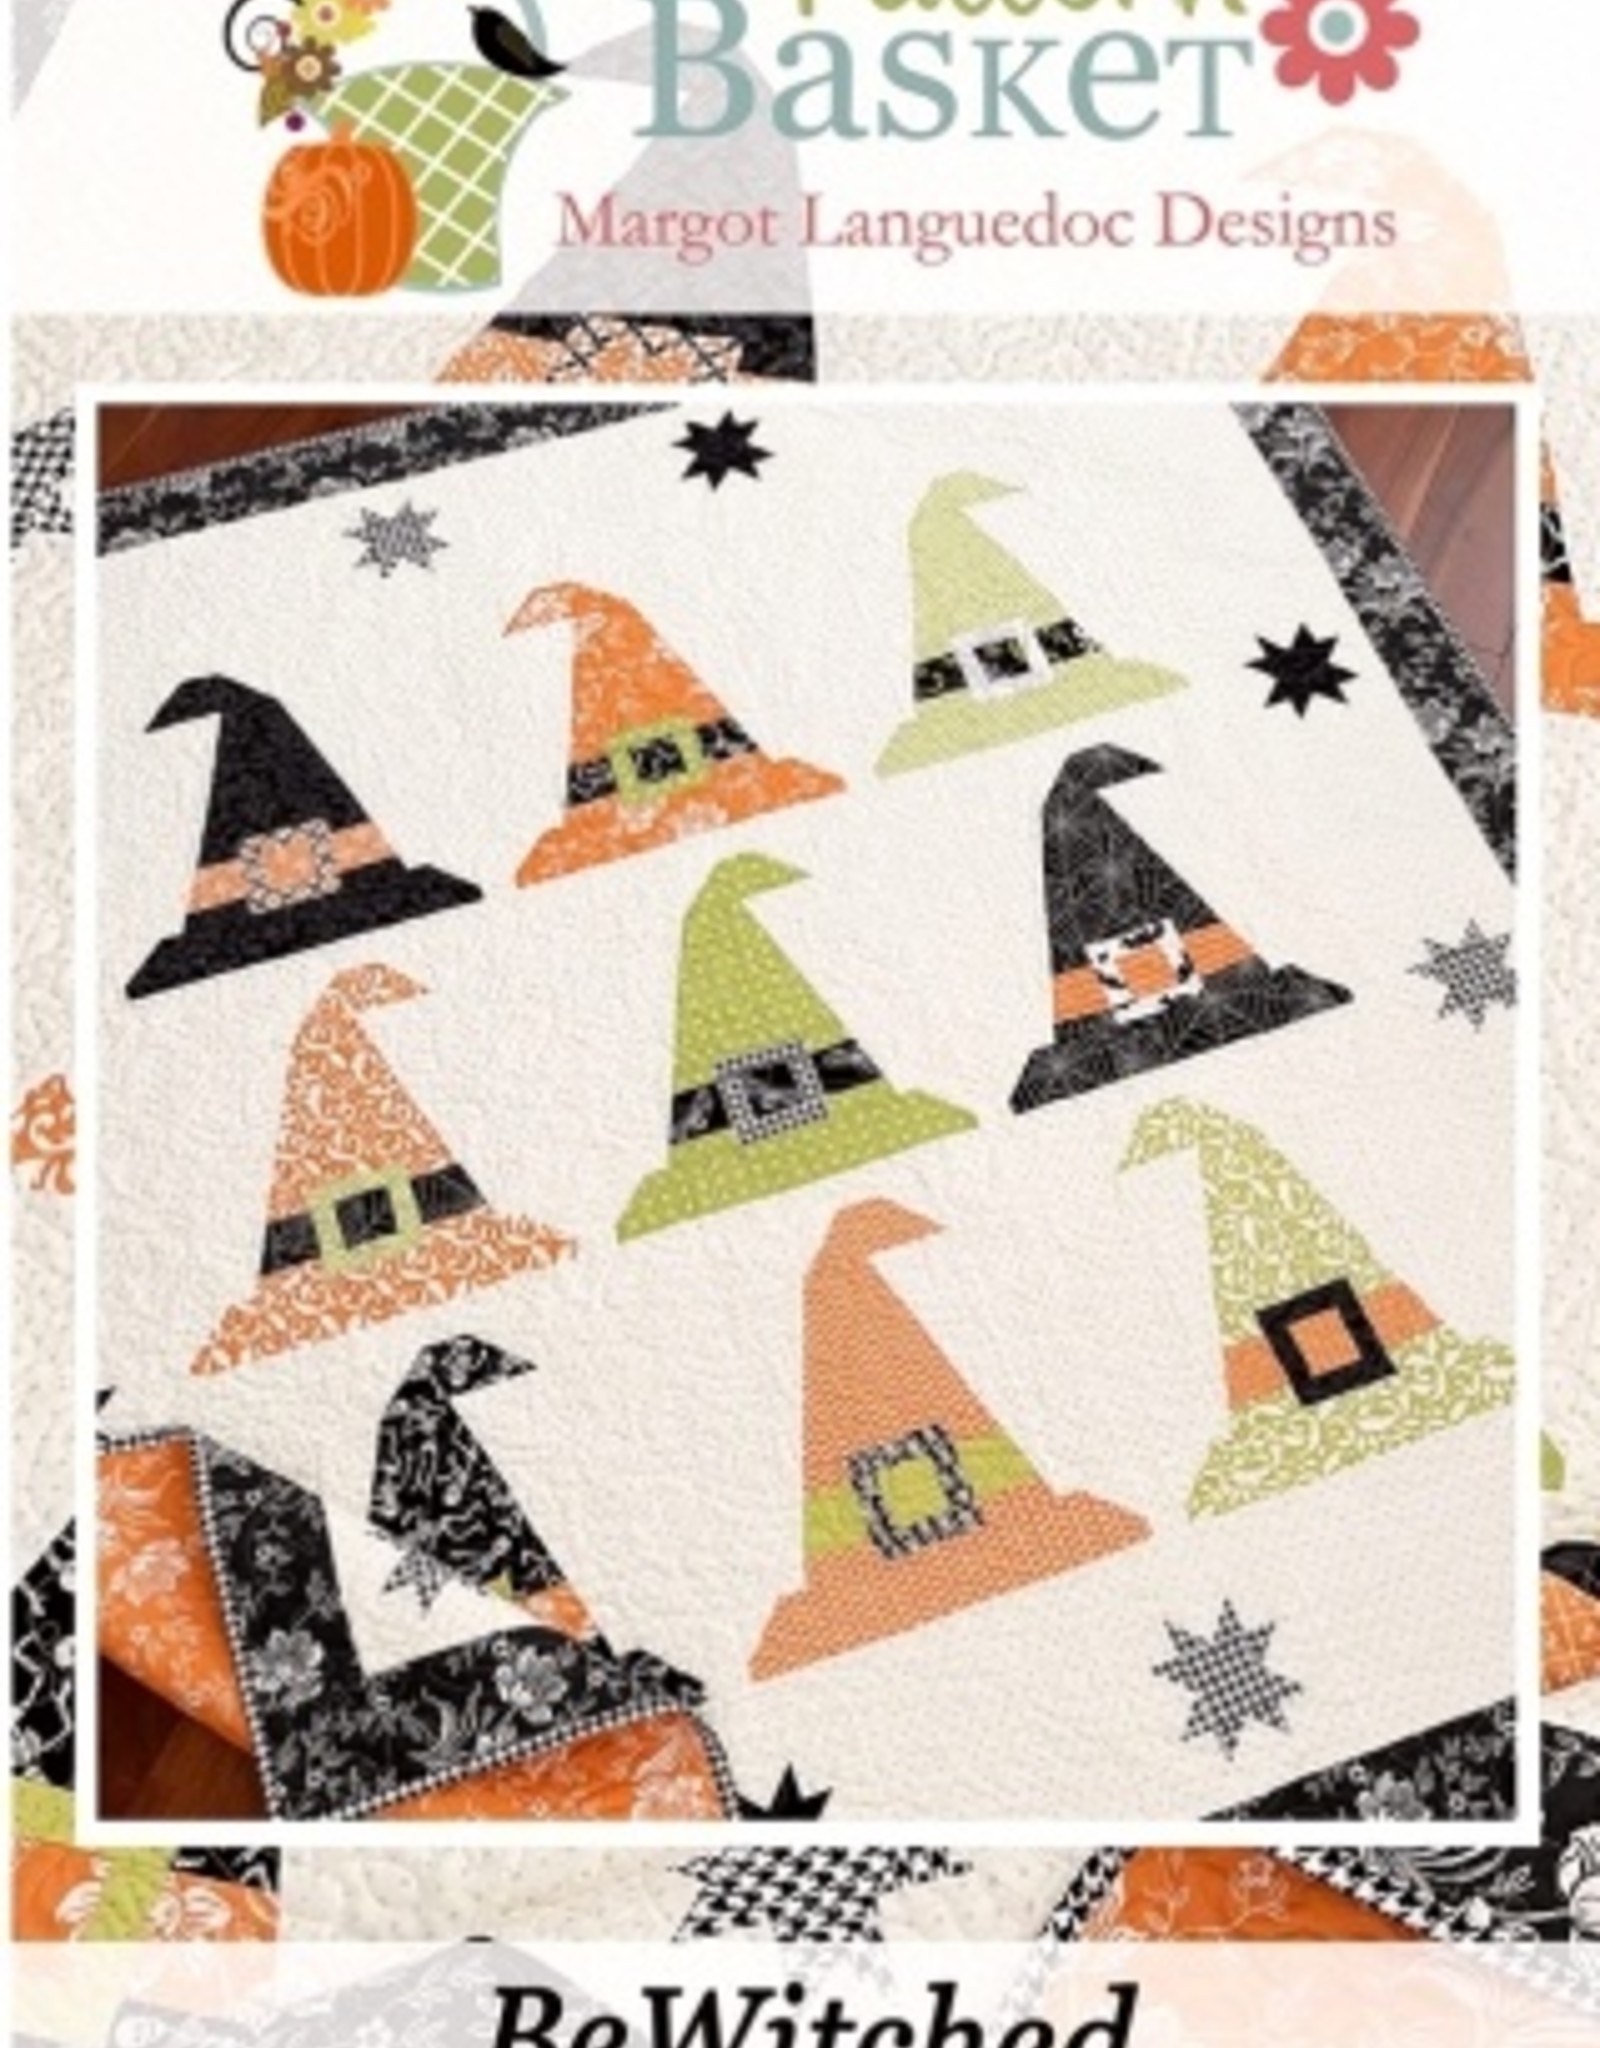 Northcott BeWitched Pre-cut - 61"x61" quilt kit #2 (without batting)